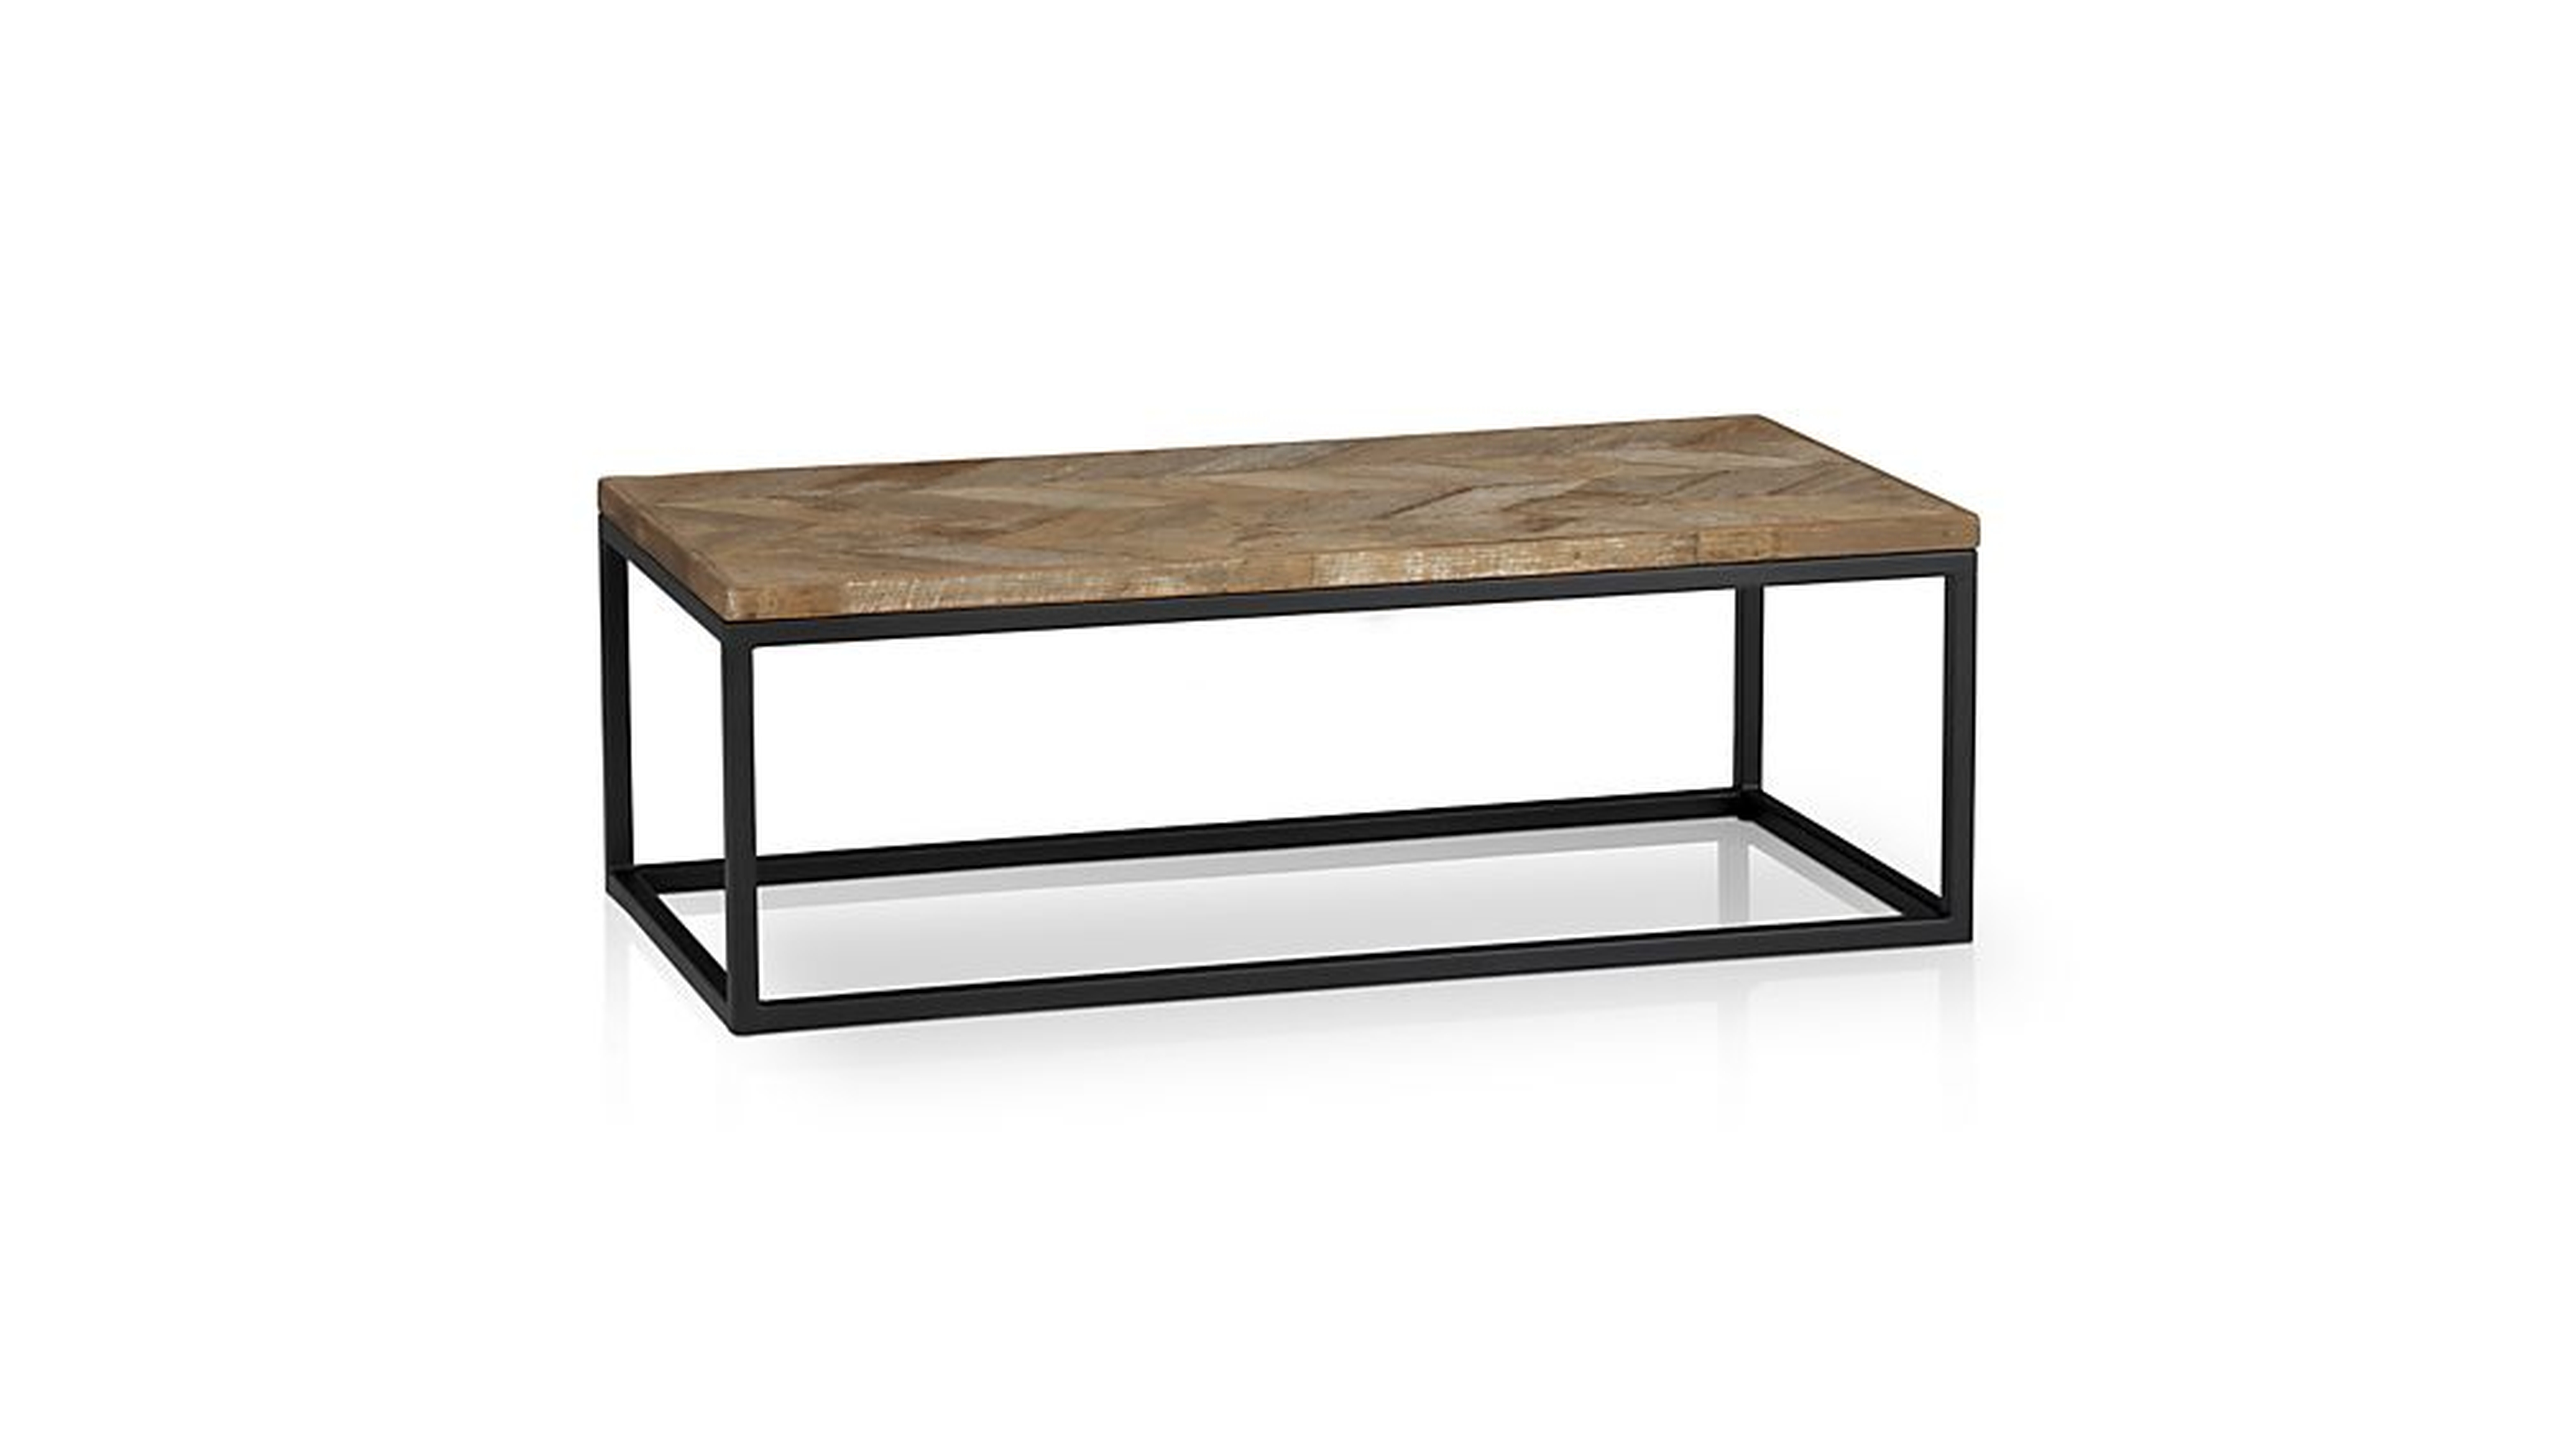 Dixon Coffee Table - Crate and Barrel